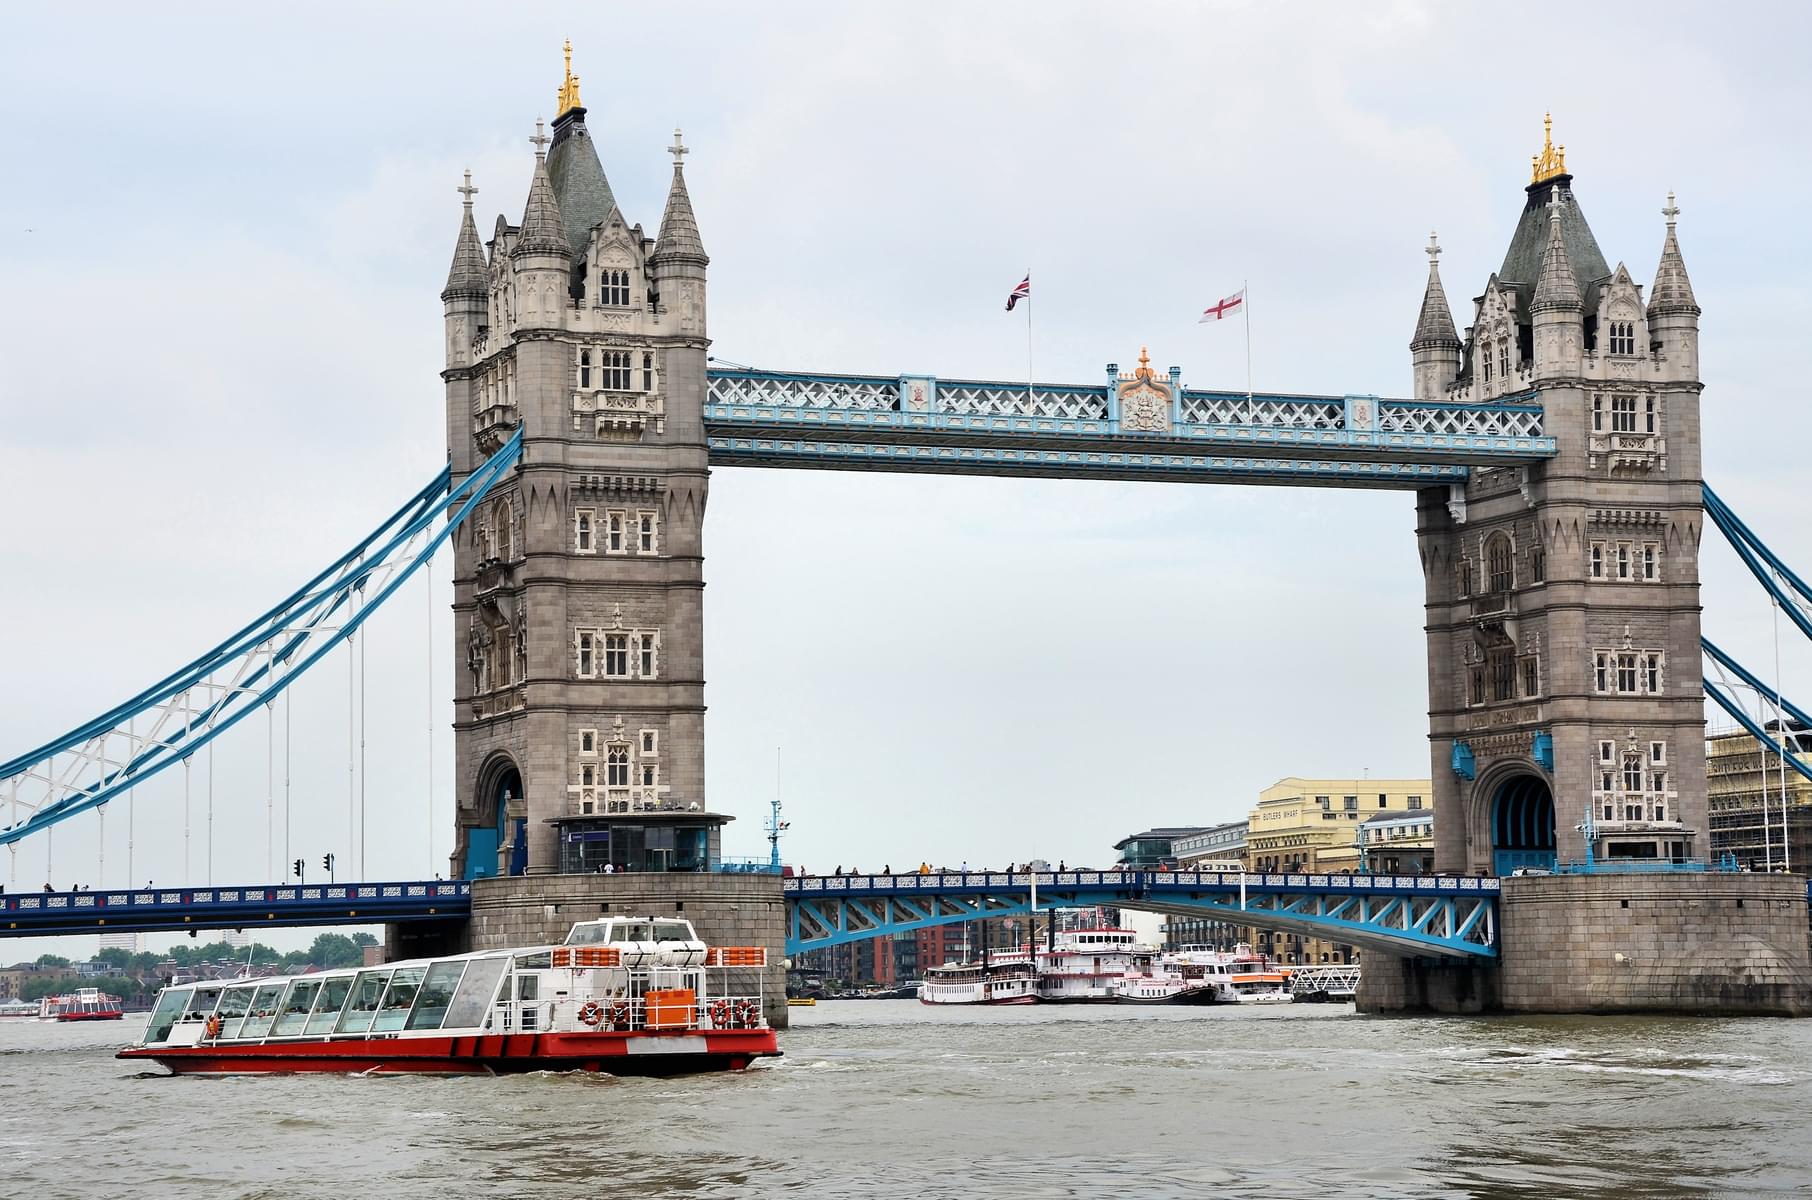 Enjoy the boat trip on River Thames to Greenwich